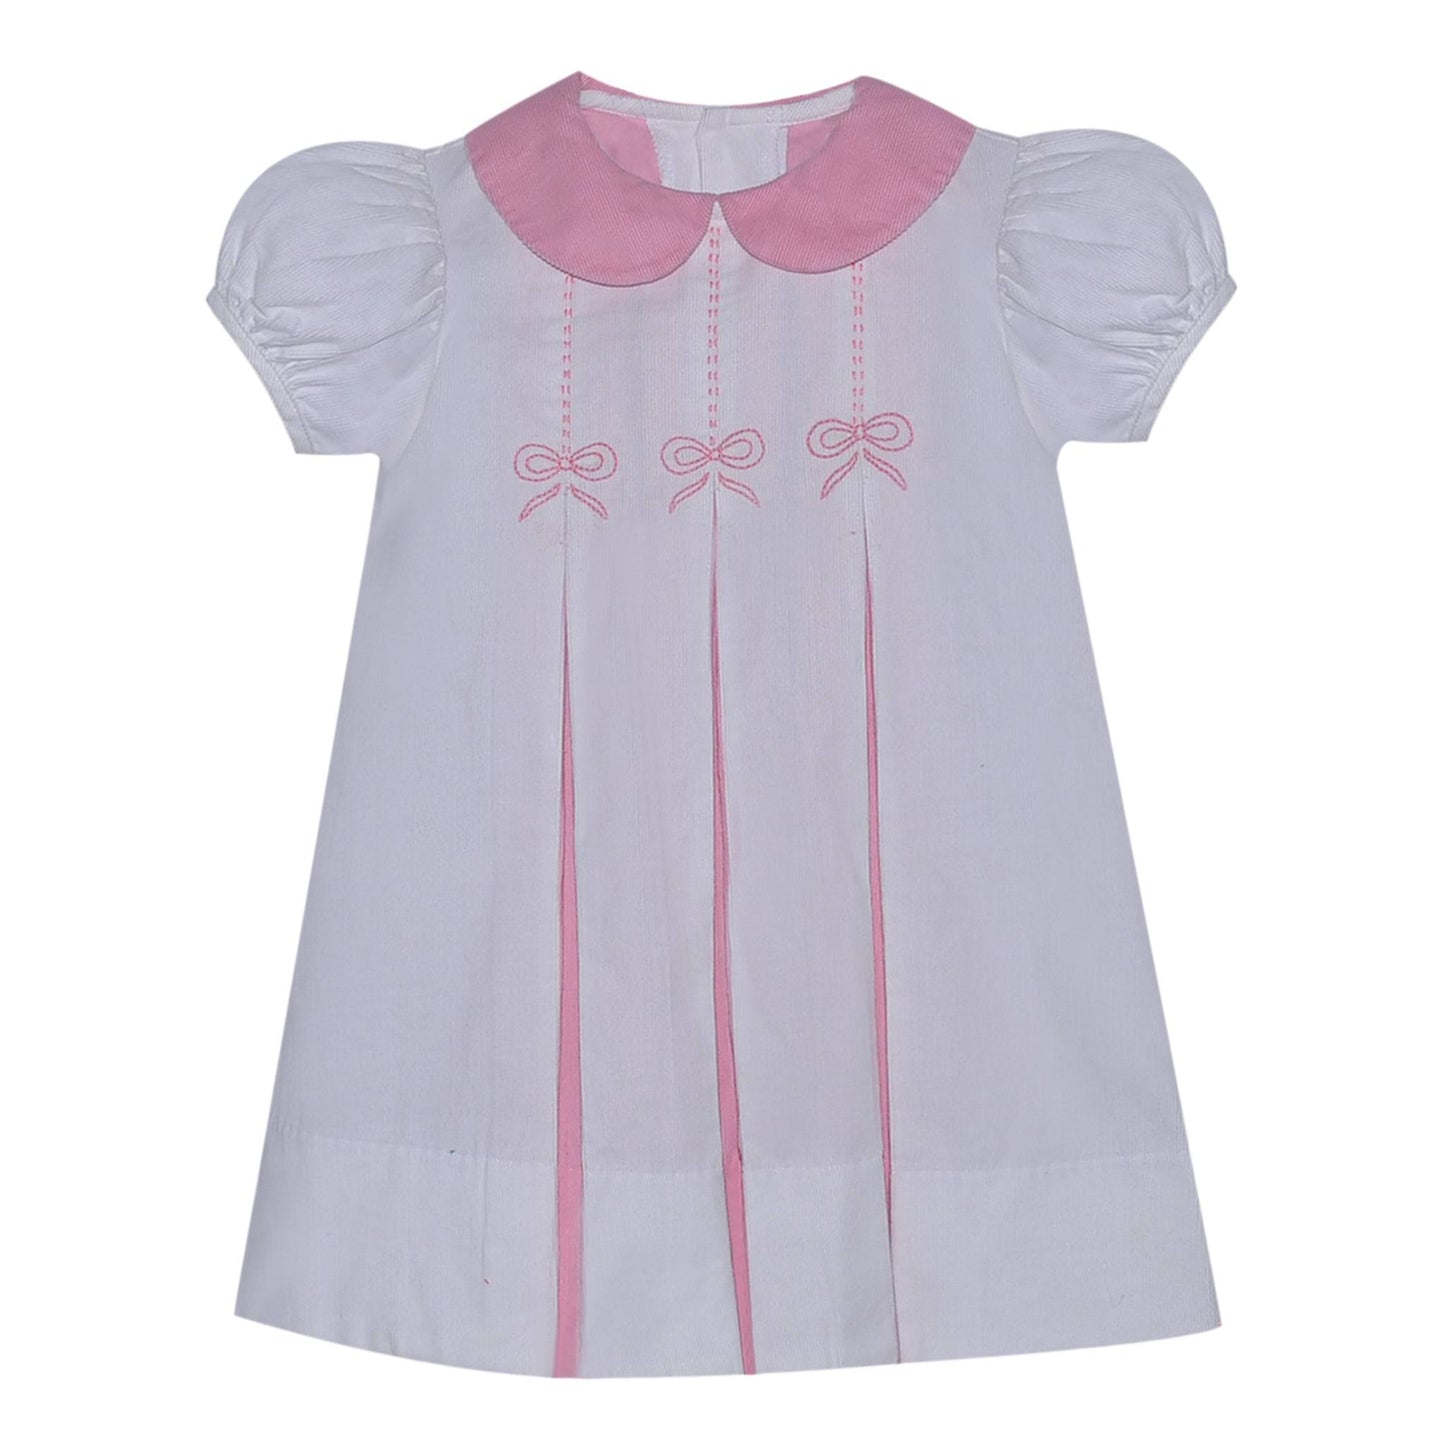 Reese Dress with Bow Embroidery